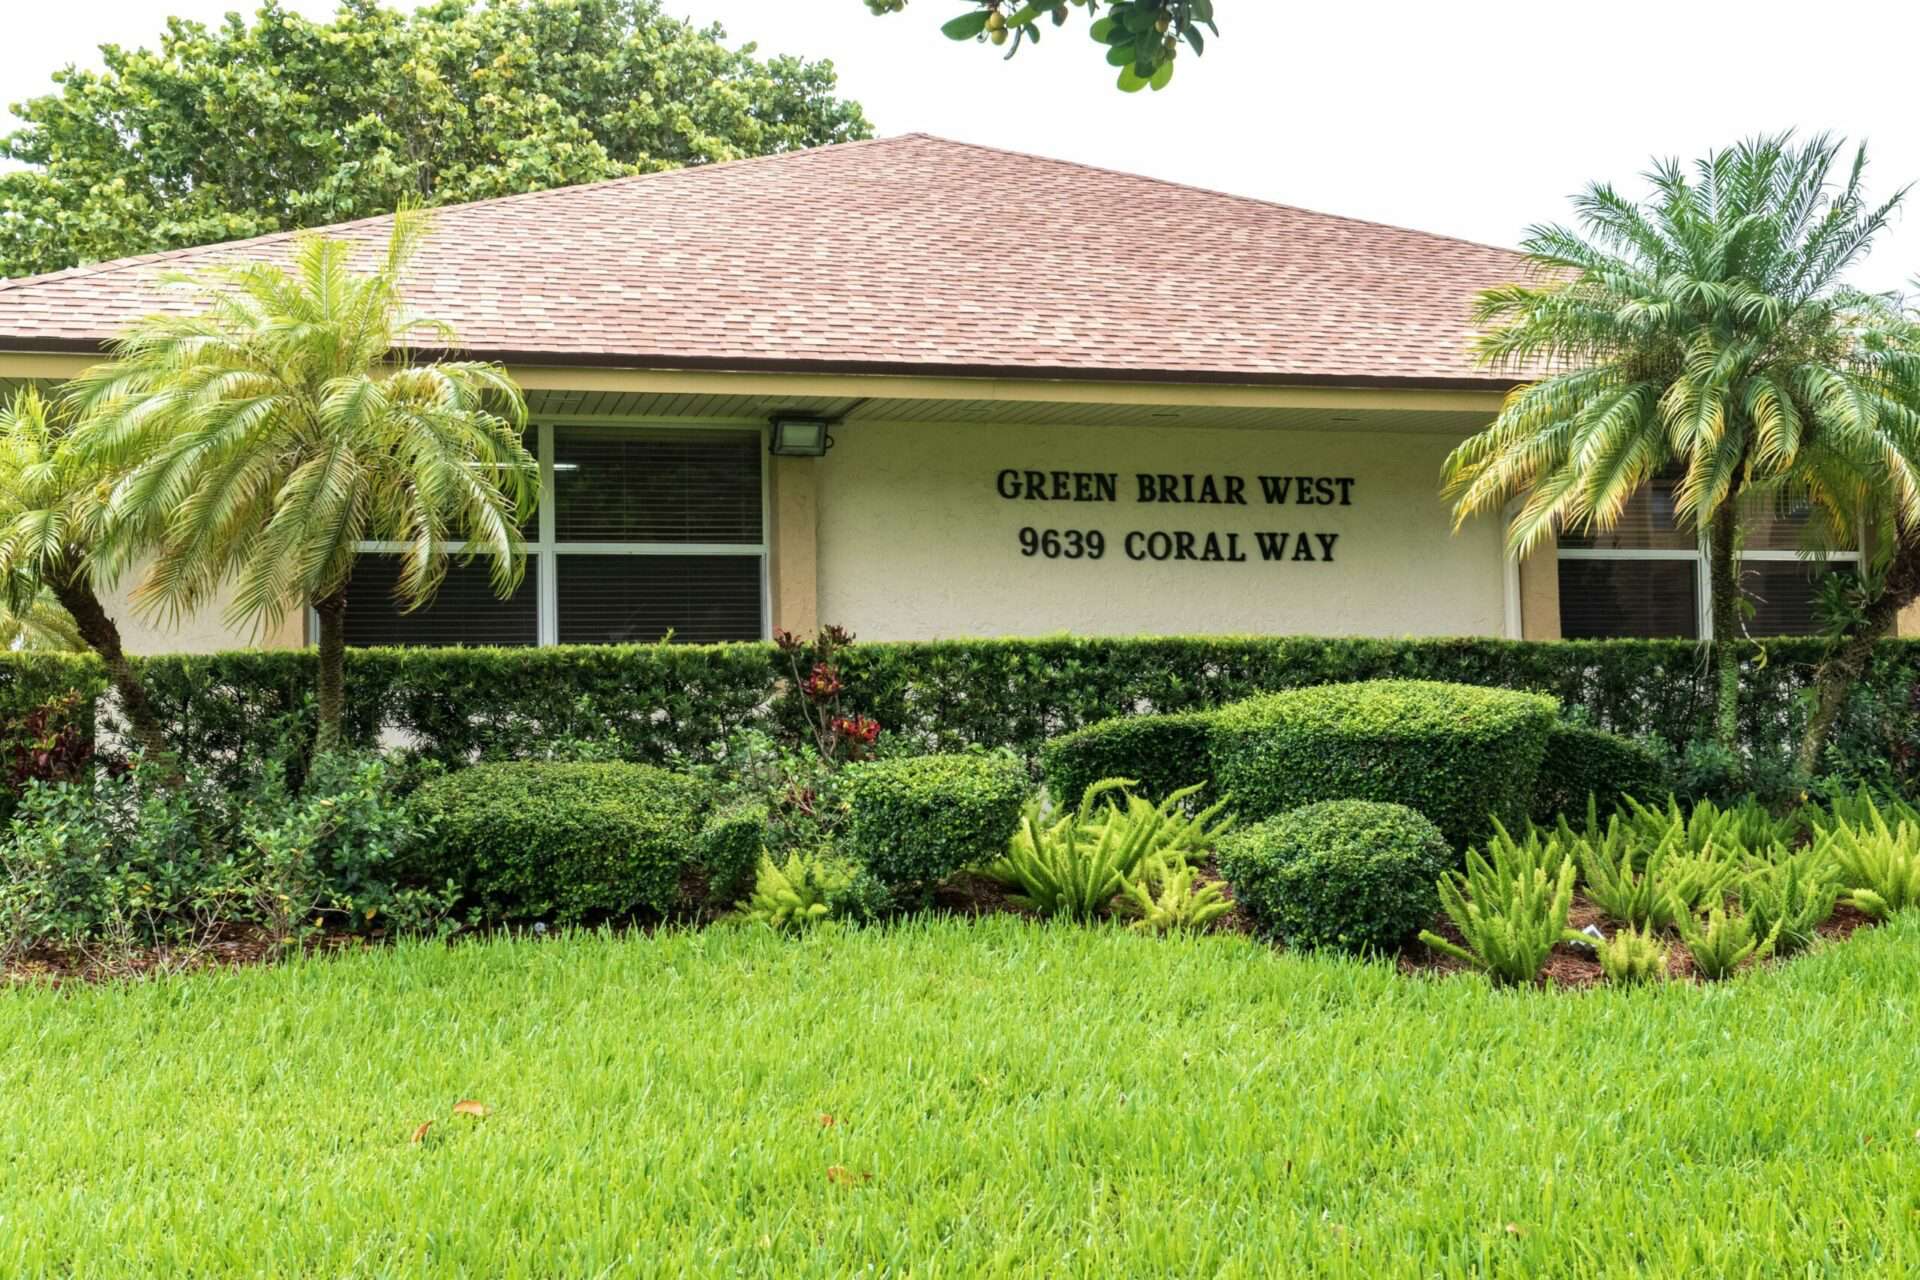 Exterior of Green Briar West leasing office in Miami, Florida.